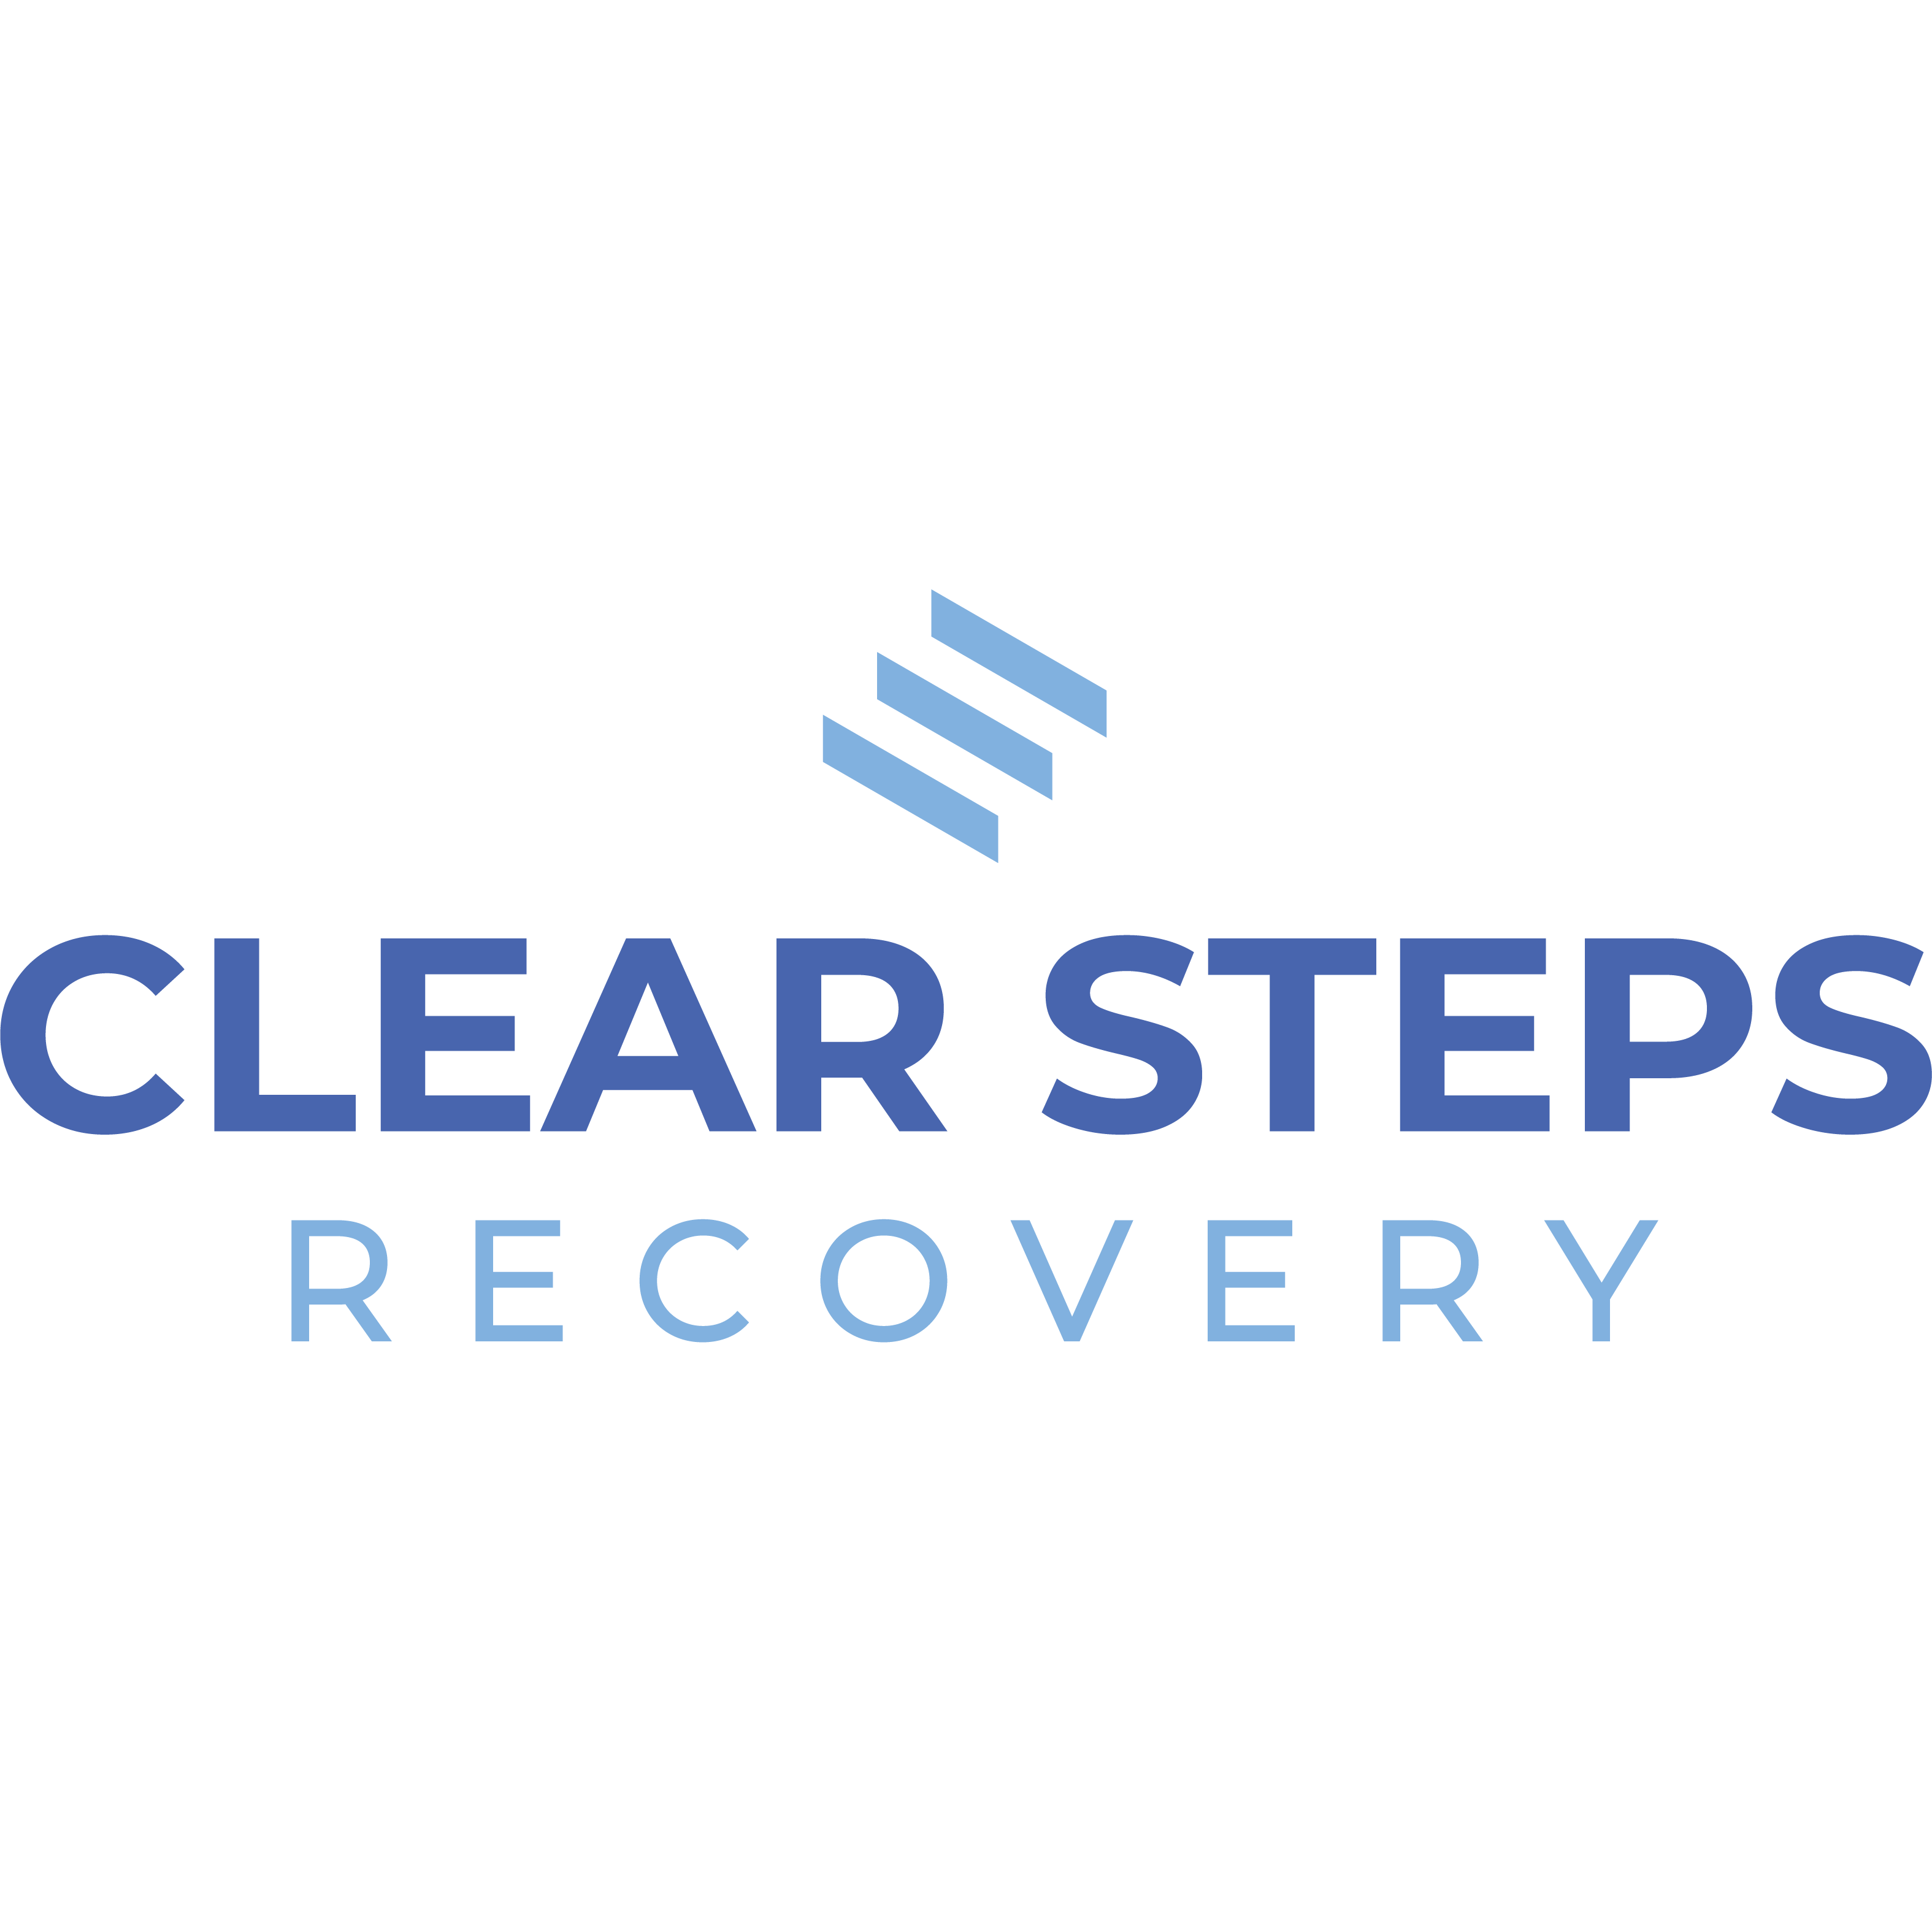 Clear Steps Recovery